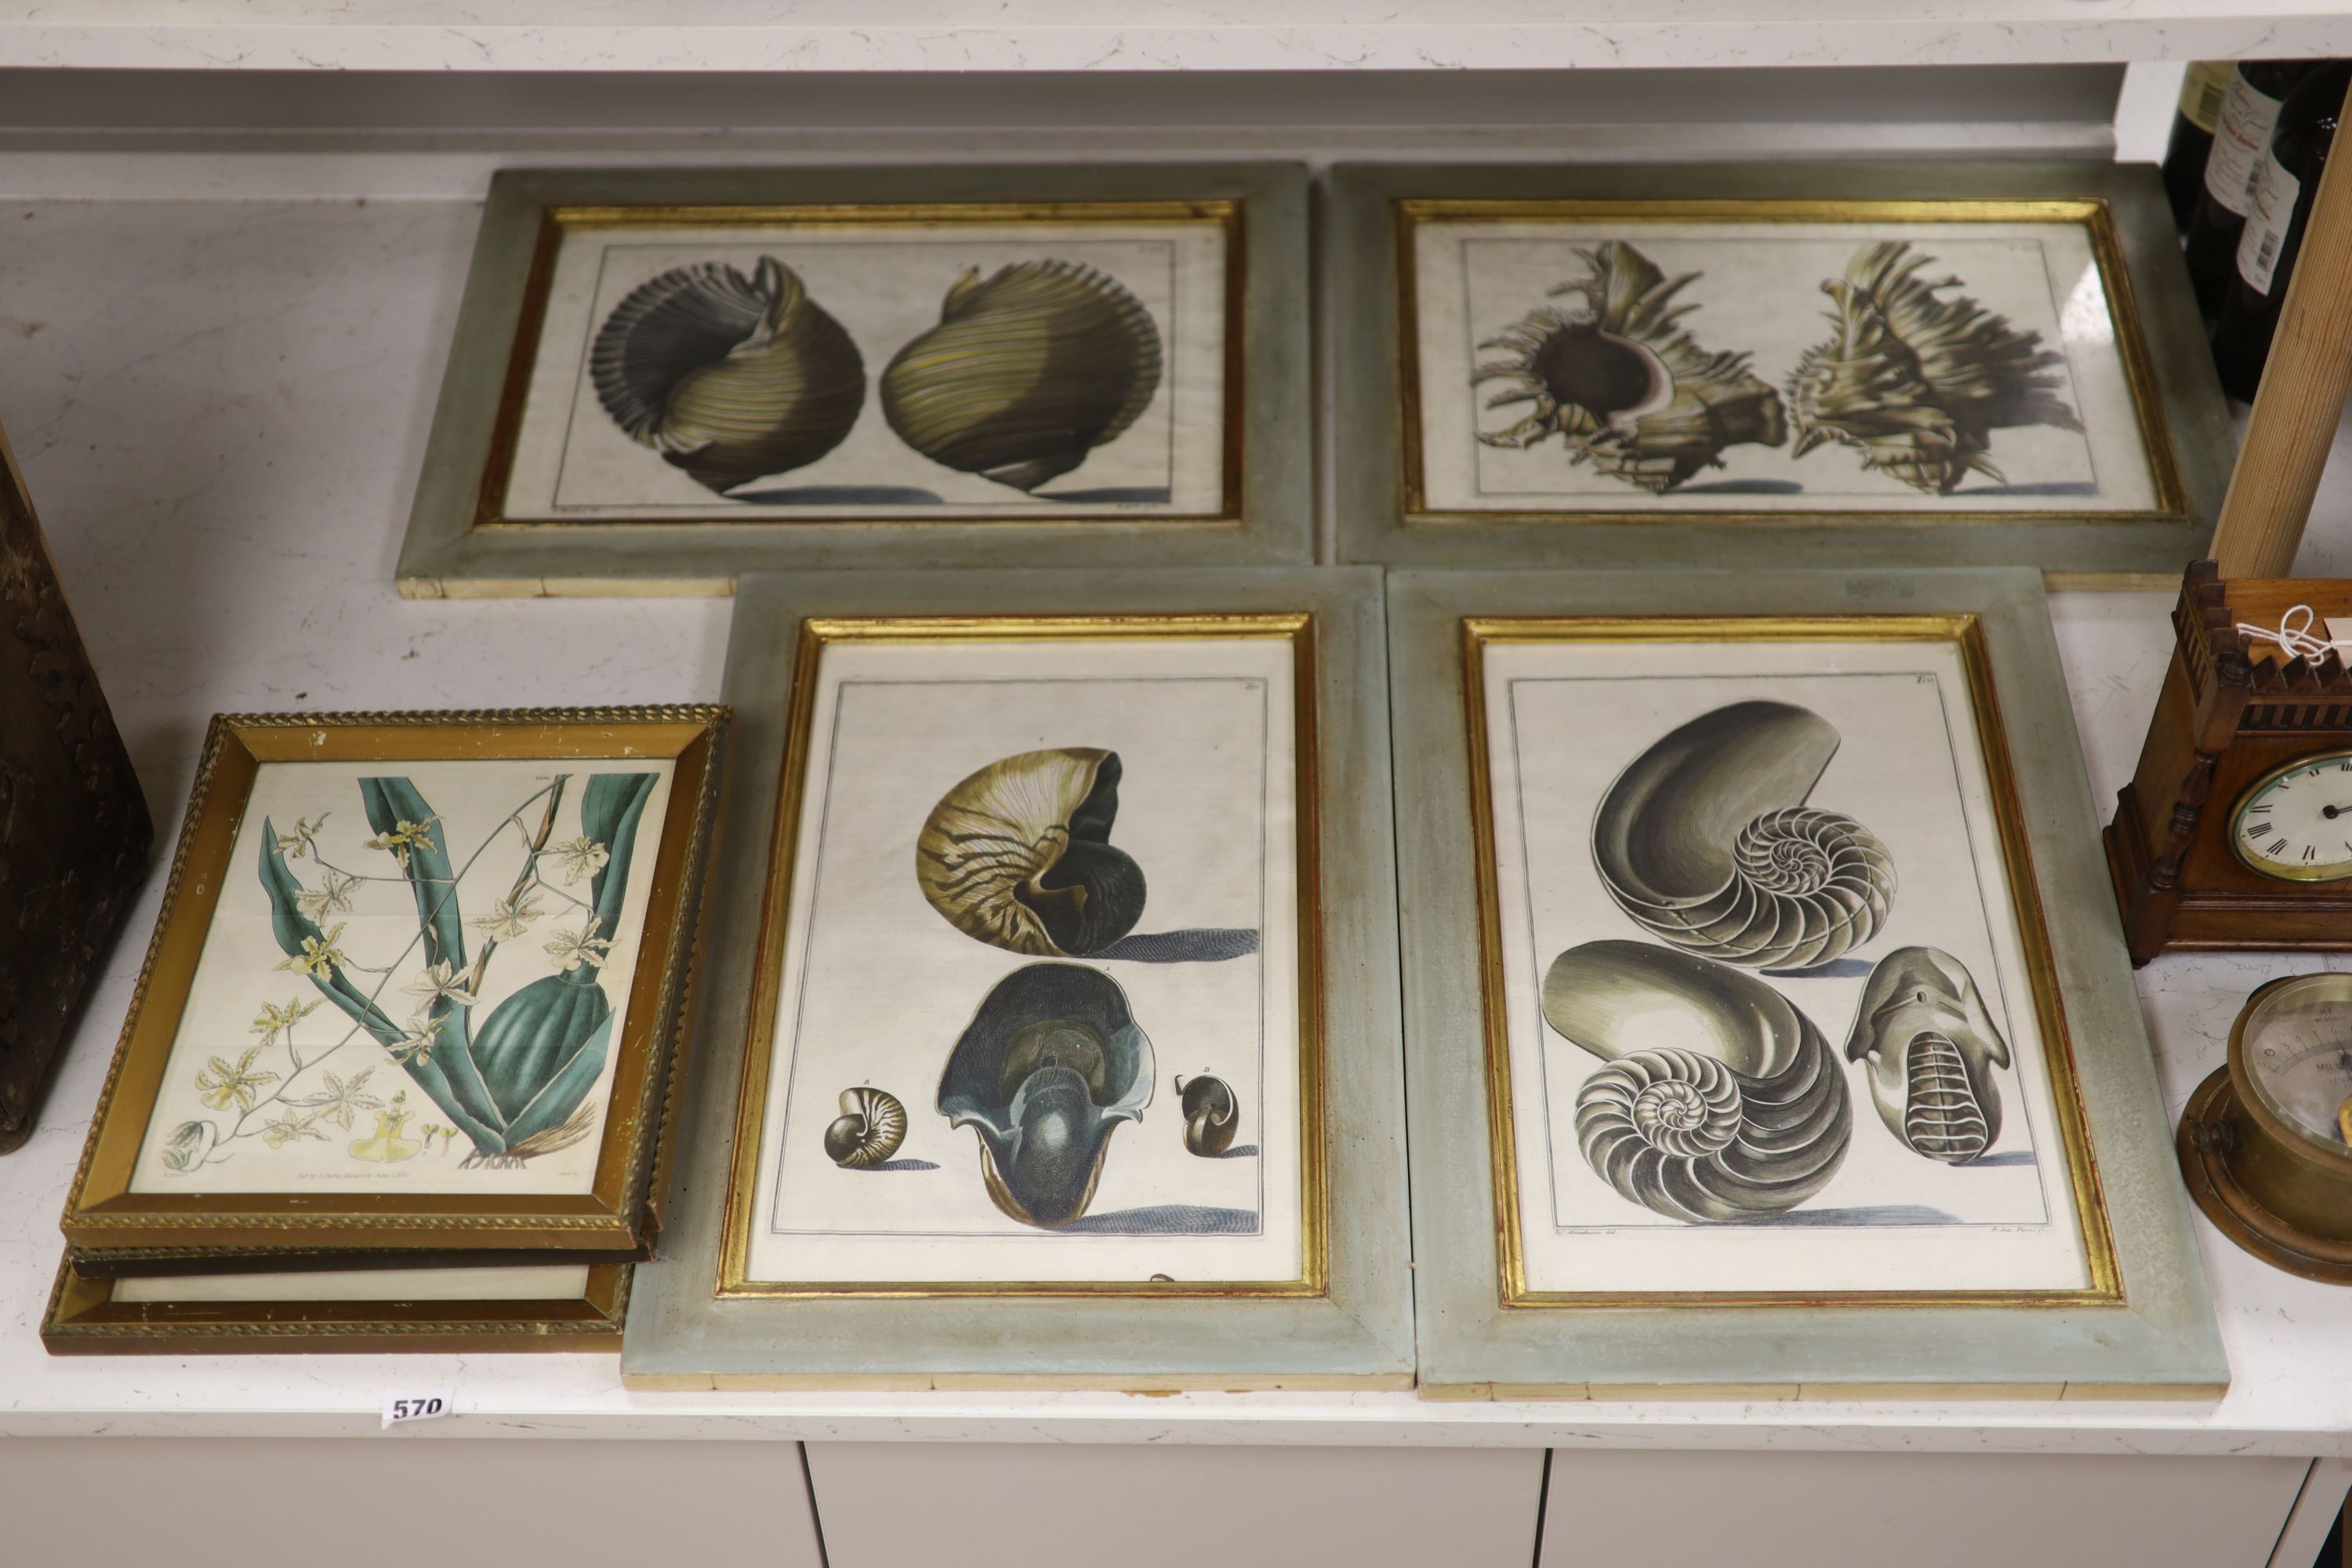 Pazzi after Menabuoni, four hand coloured engravings, Studies of shells, 41 x 26cm and a set of four hand coloured botanical engravings of Orchids, 26 x 22cm